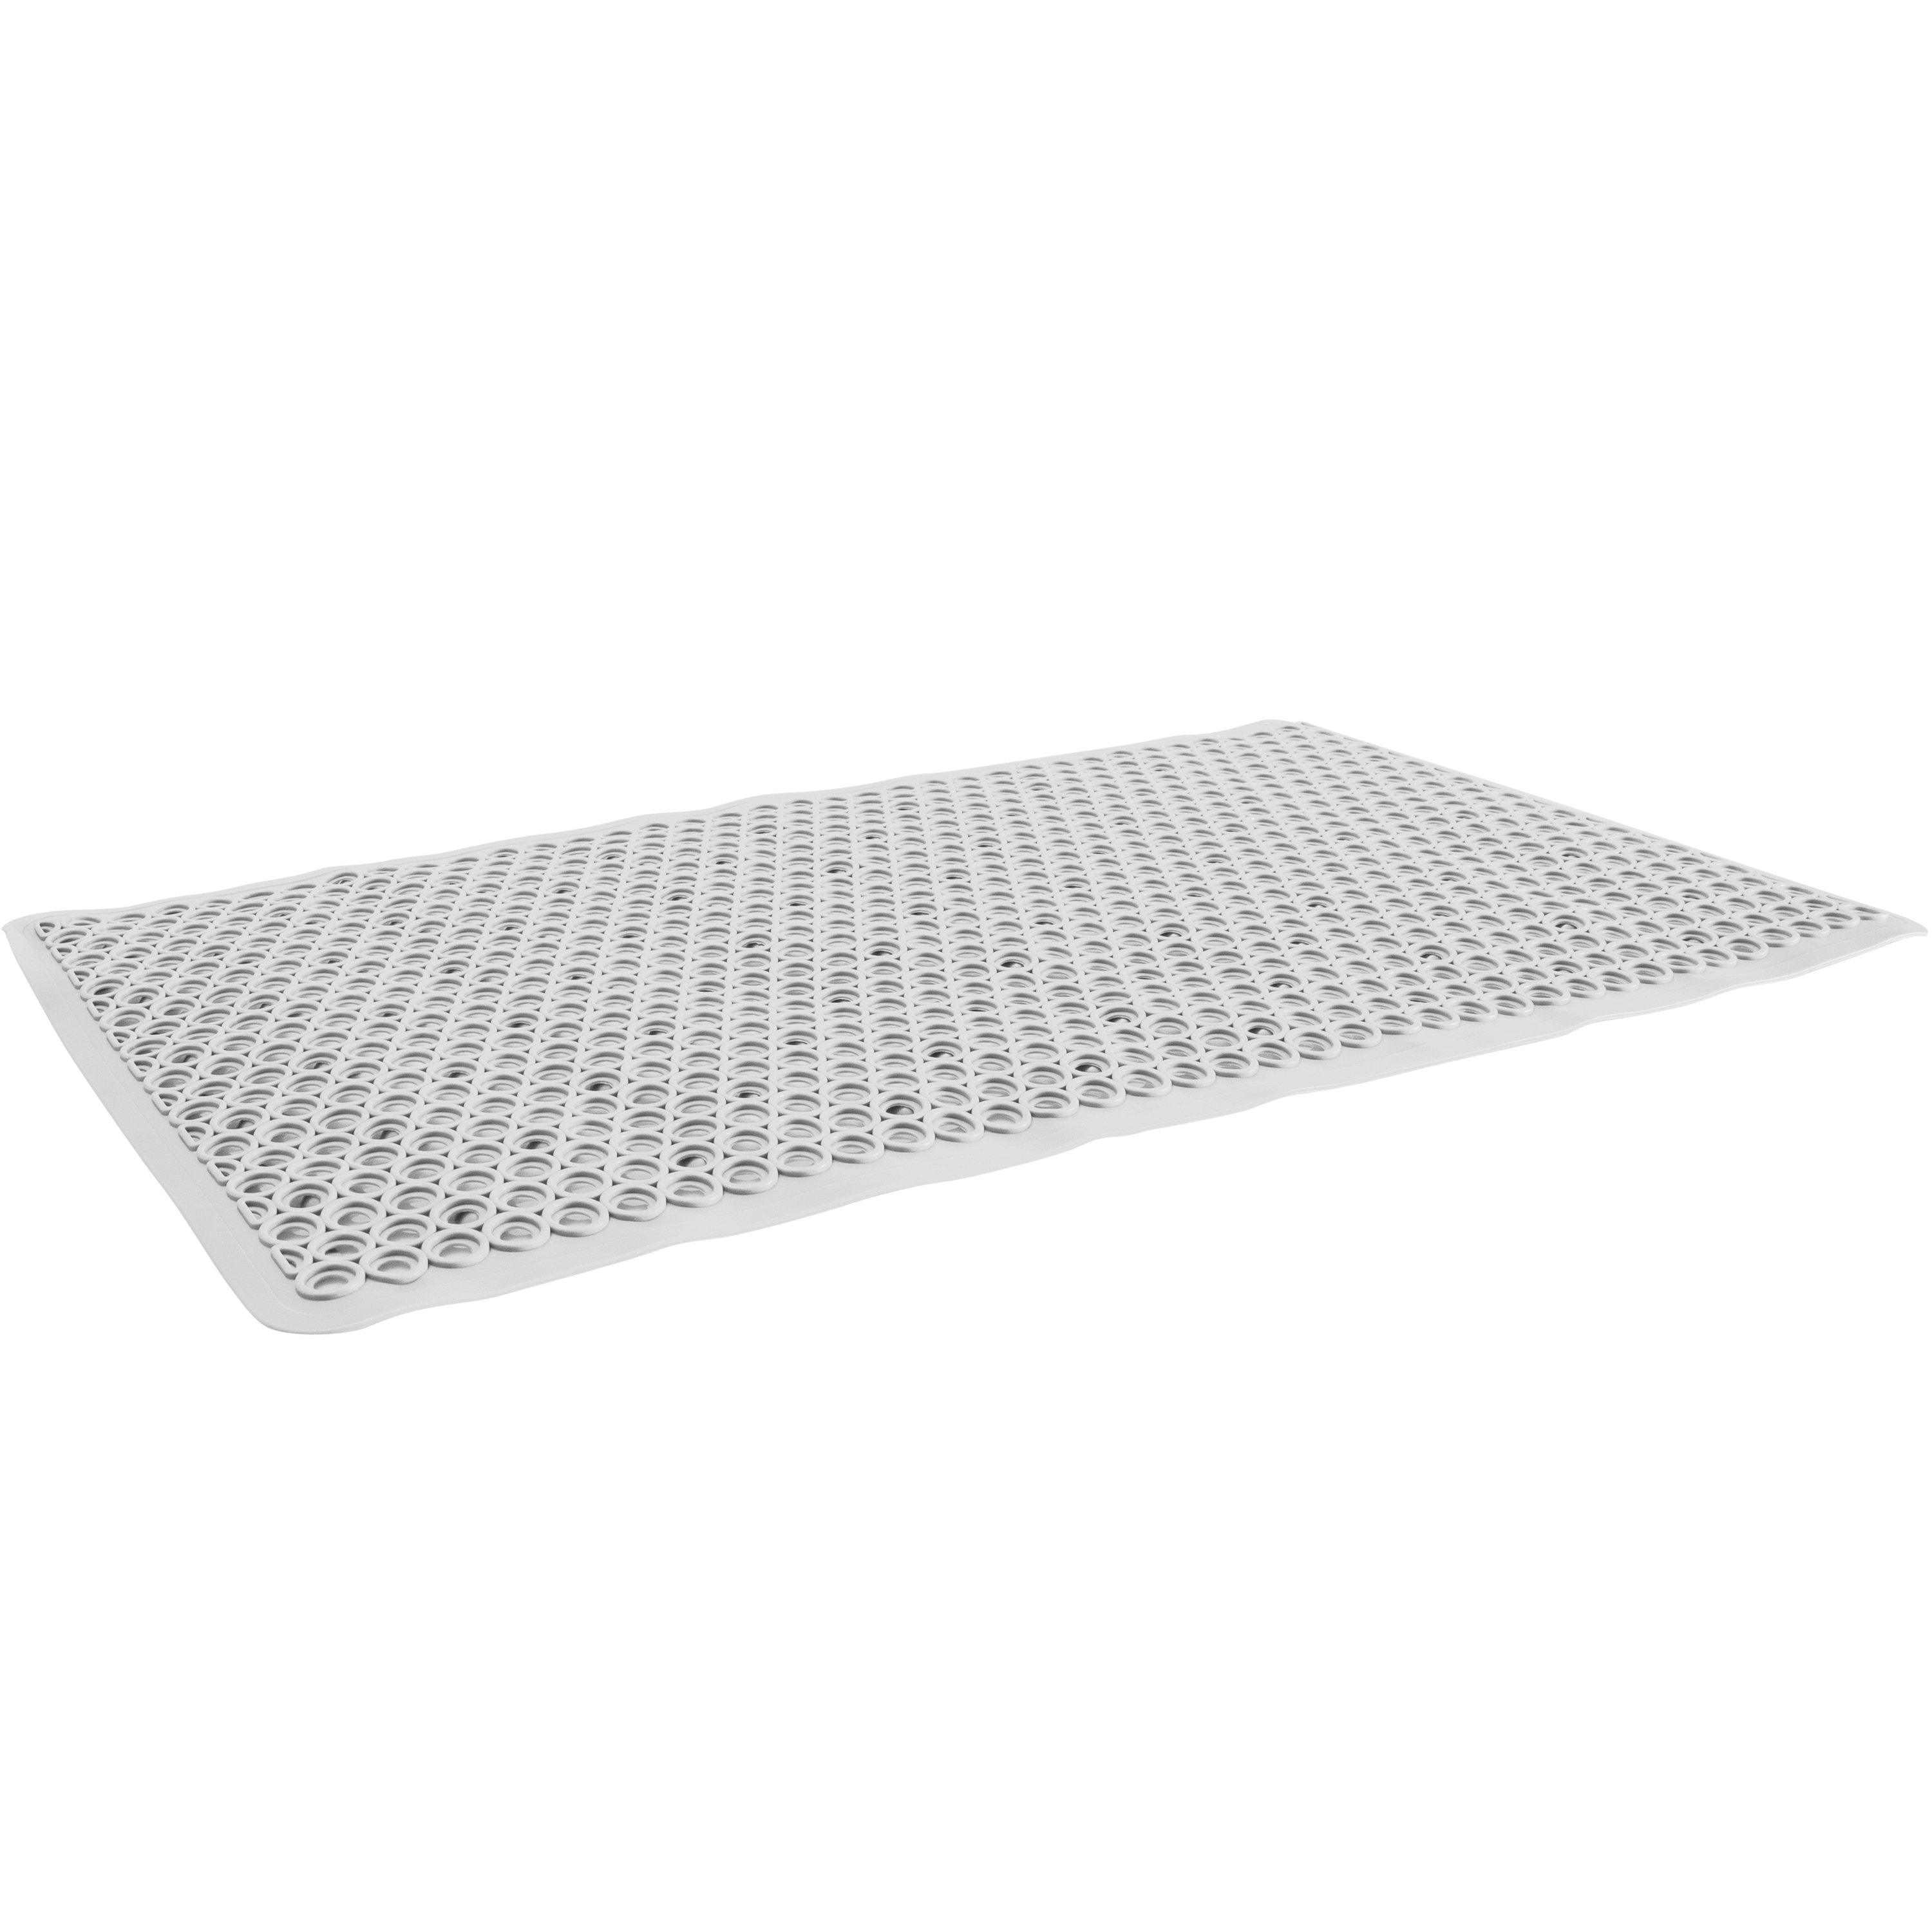 Microwave Splatter Cover Keeps Your Microwave Spotless, BA291-6 - On Sale -  Bed Bath & Beyond - 32200886